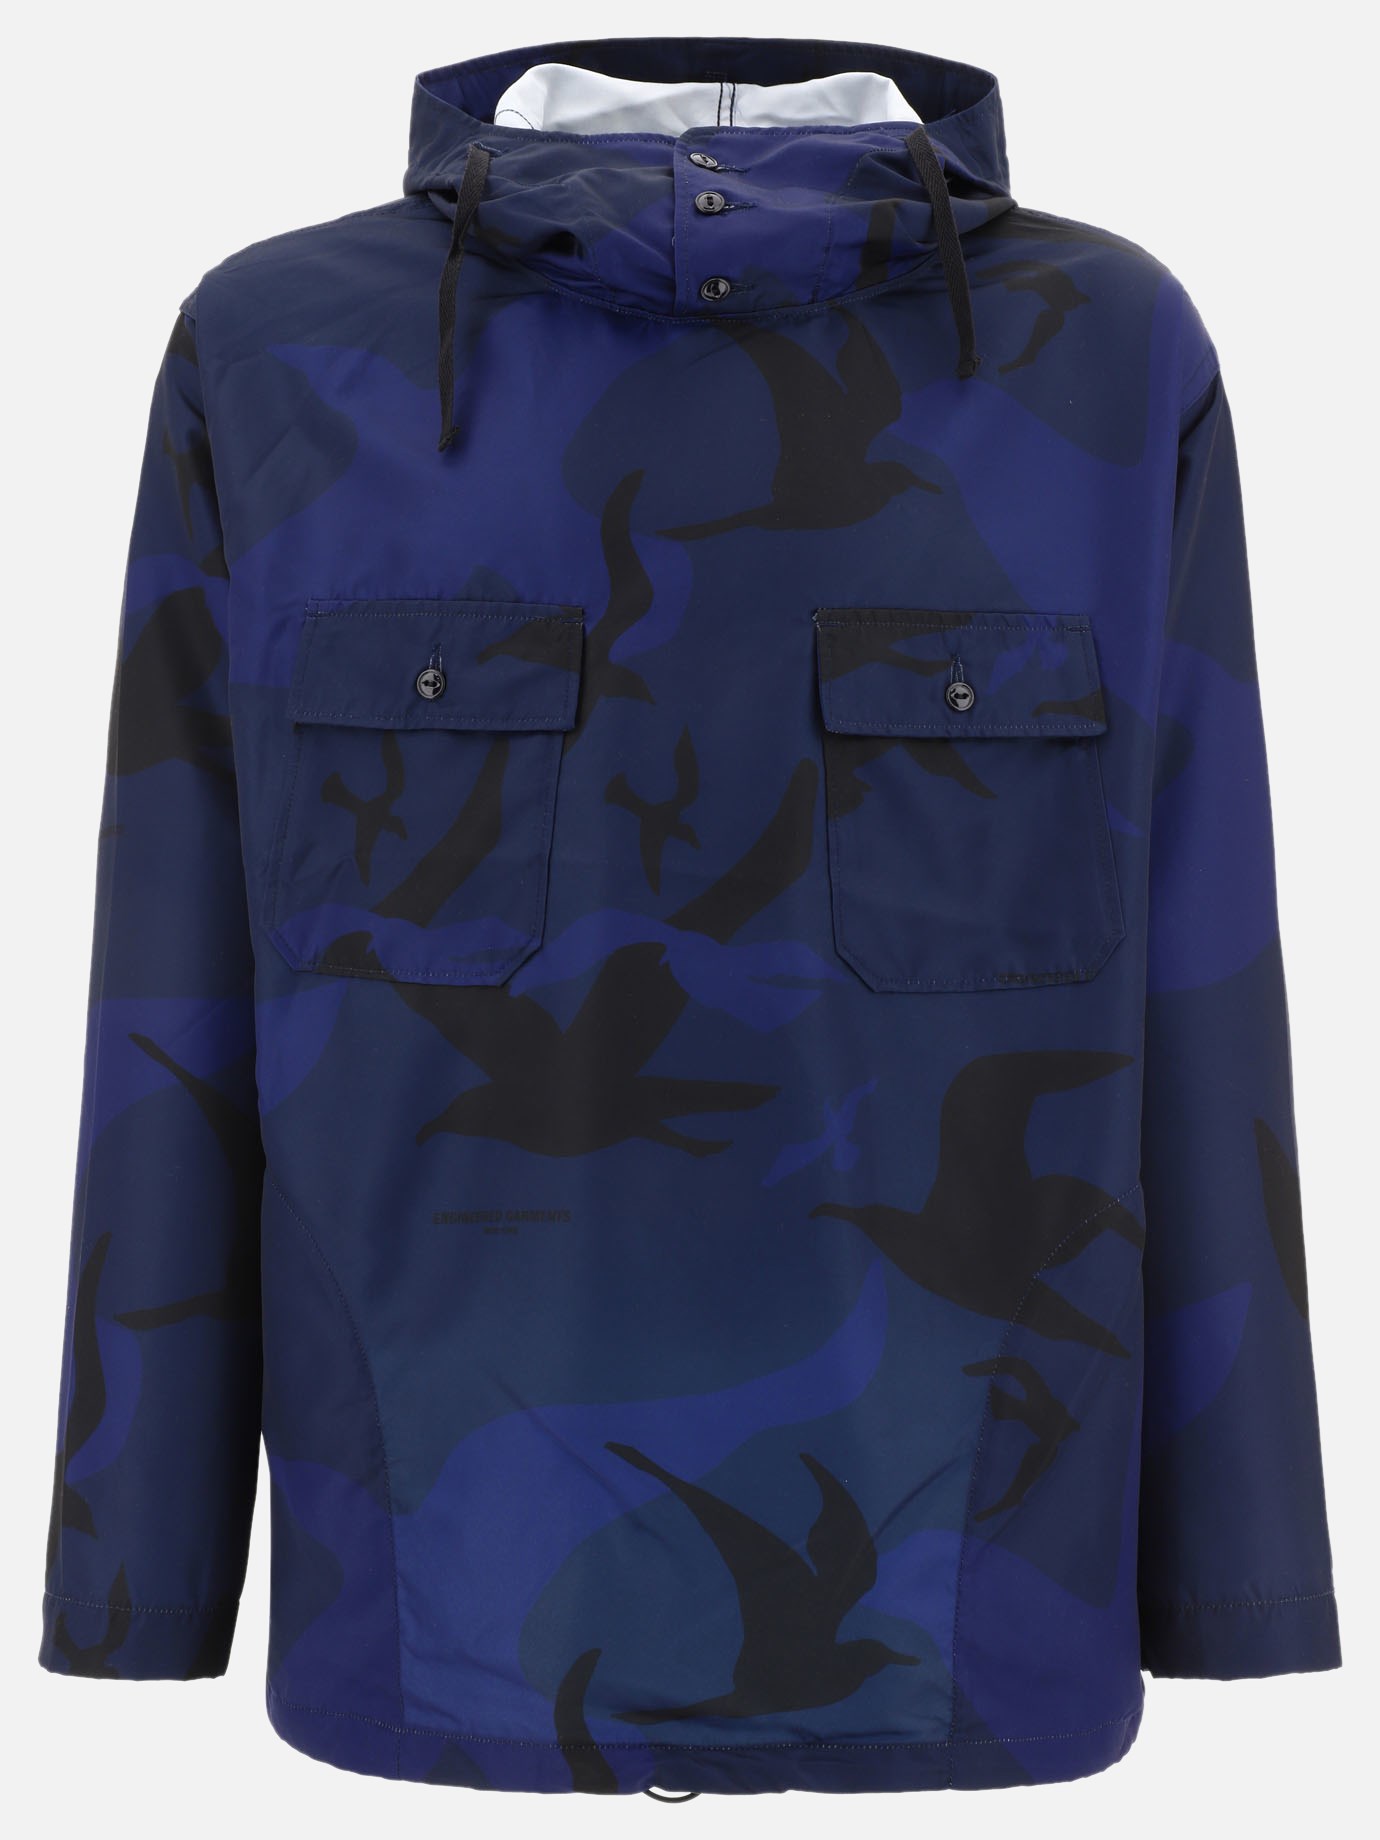 Overshirt  Cagoule by Engineered Garments - 4